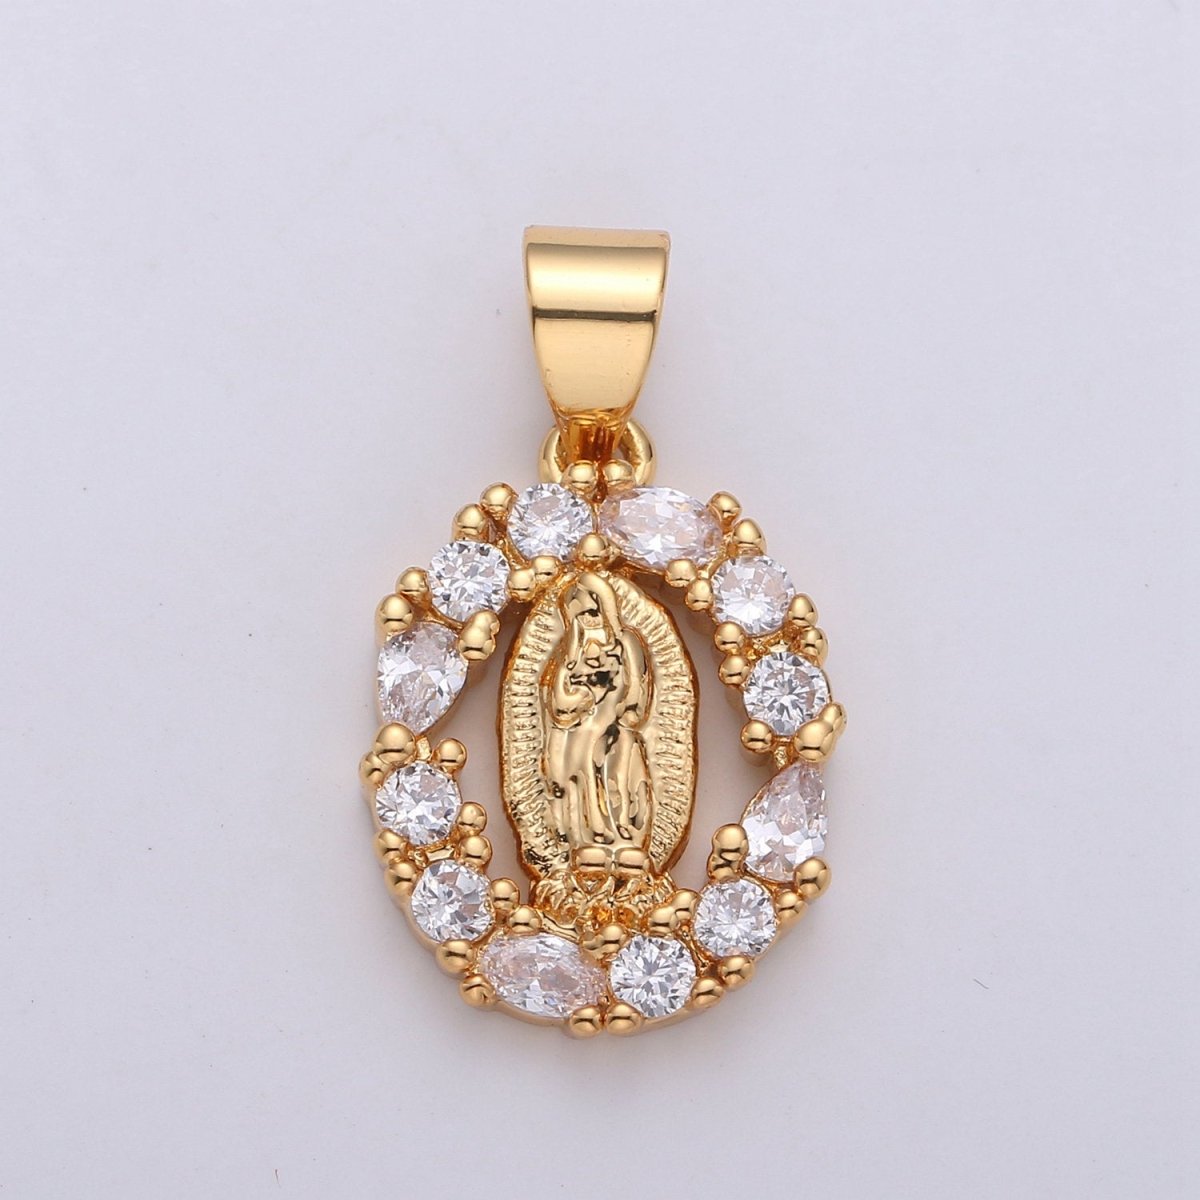 Dainty 24k Gold Filled Virgin Mary Pendant Necklace Micro Pave Lady Guadalupe Medallion Pendant for Necklace Religious Jewelry Supply I-629 - DLUXCA